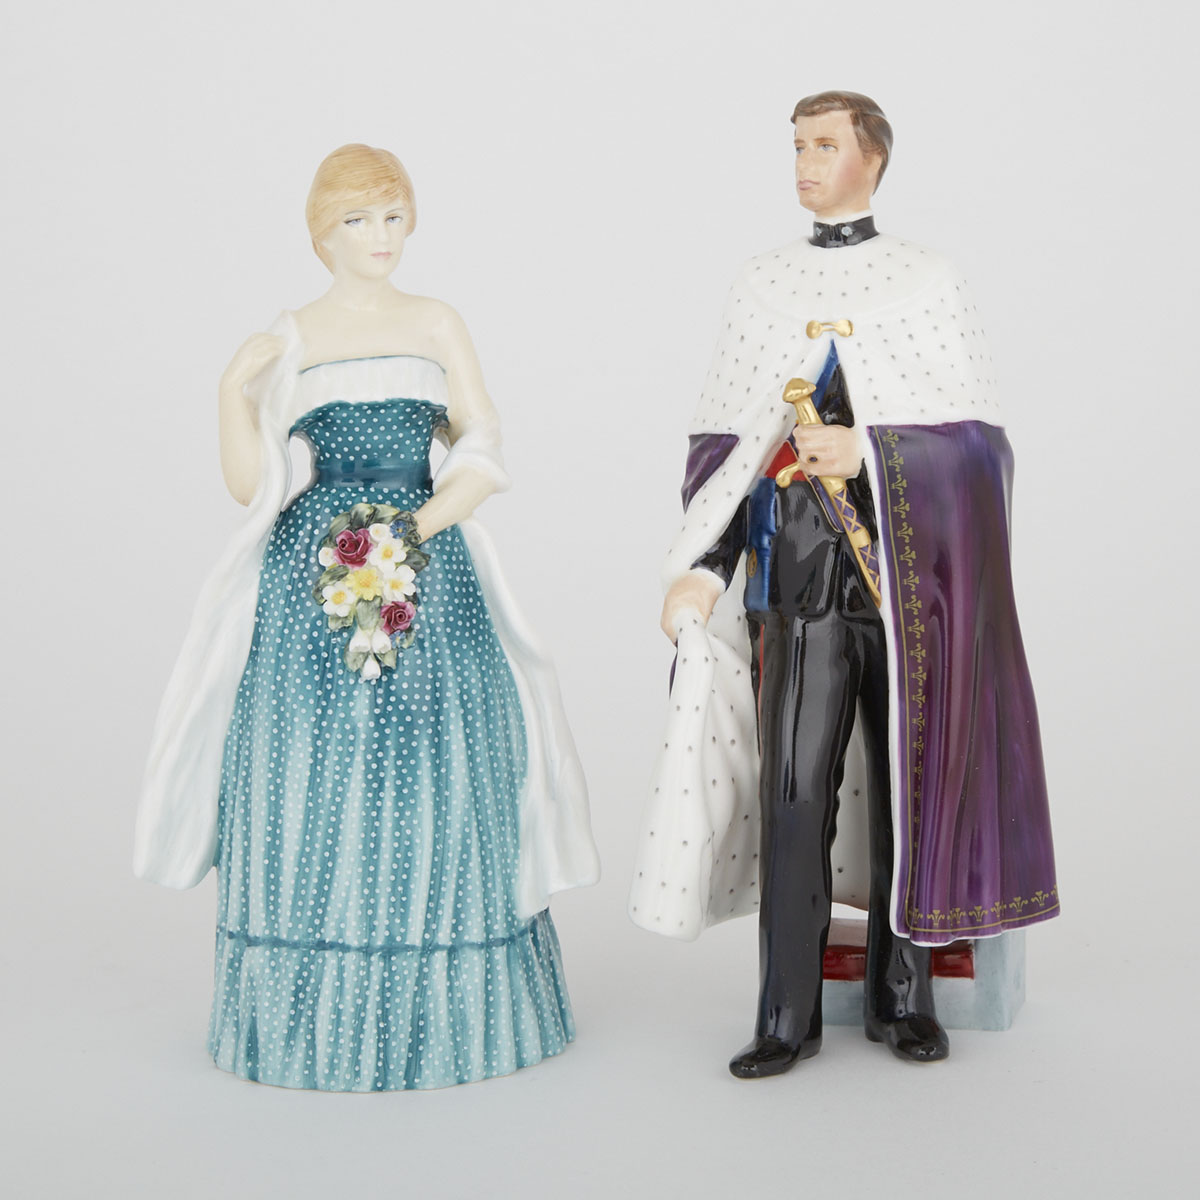 Two Royal Doulton Portrait Figures of H.R.H. The Prince of Wales and Lady Diana Spencer, c.1981